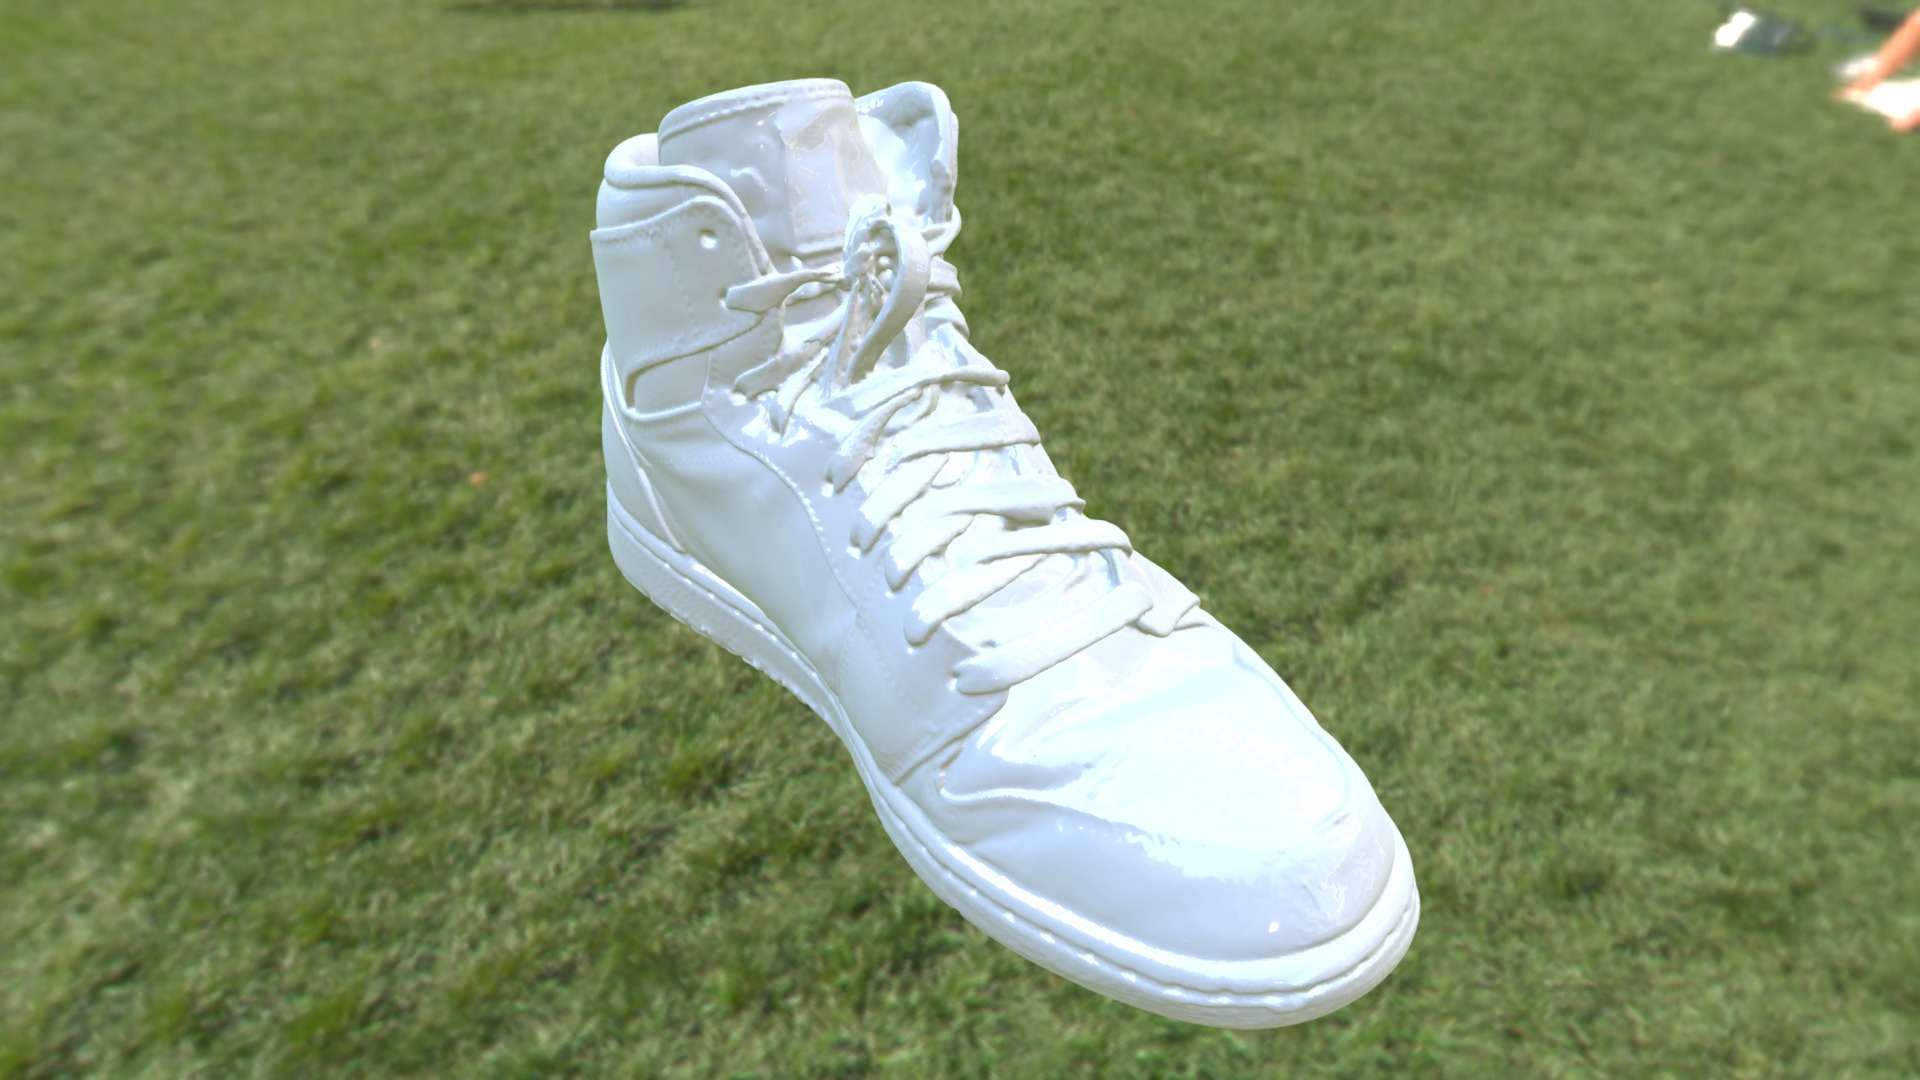 3D model Sneakers - This is a 3D model of the Sneakers. The 3D model is about a white shoe on grass.